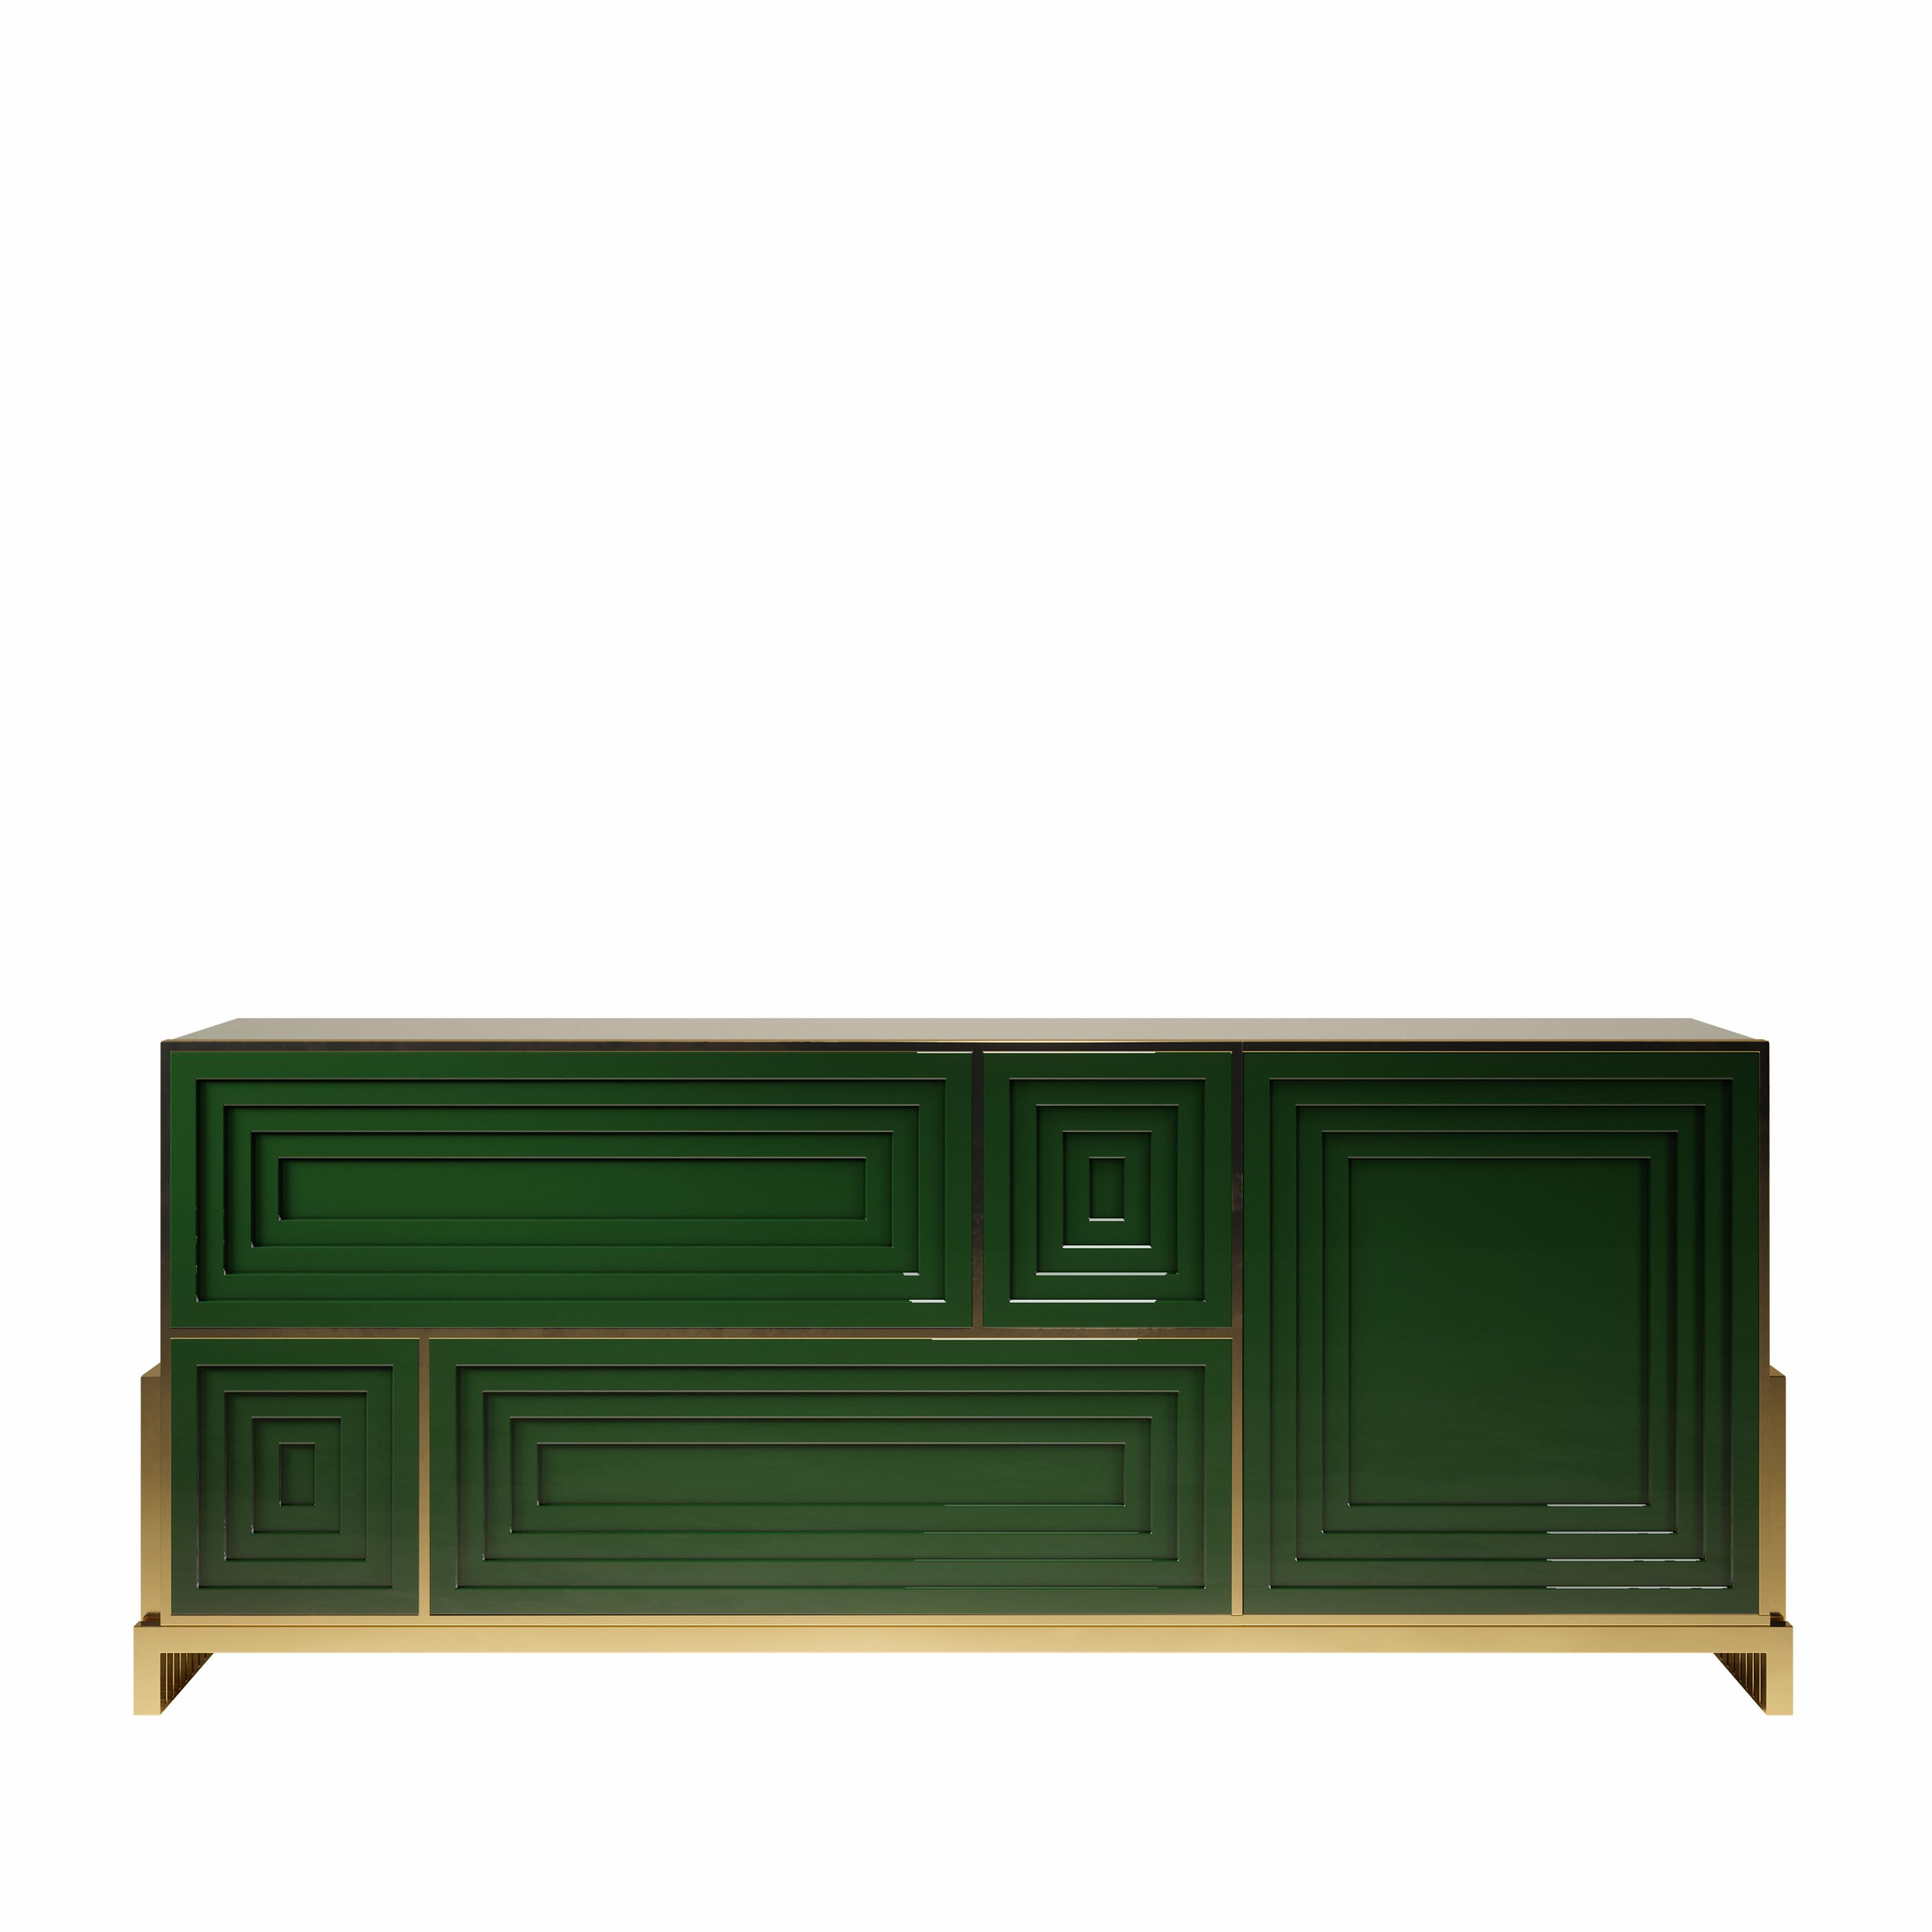 Portuguese 21st Century Venezia Sideboard Lacquered Wood Brass by Malabar For Sale